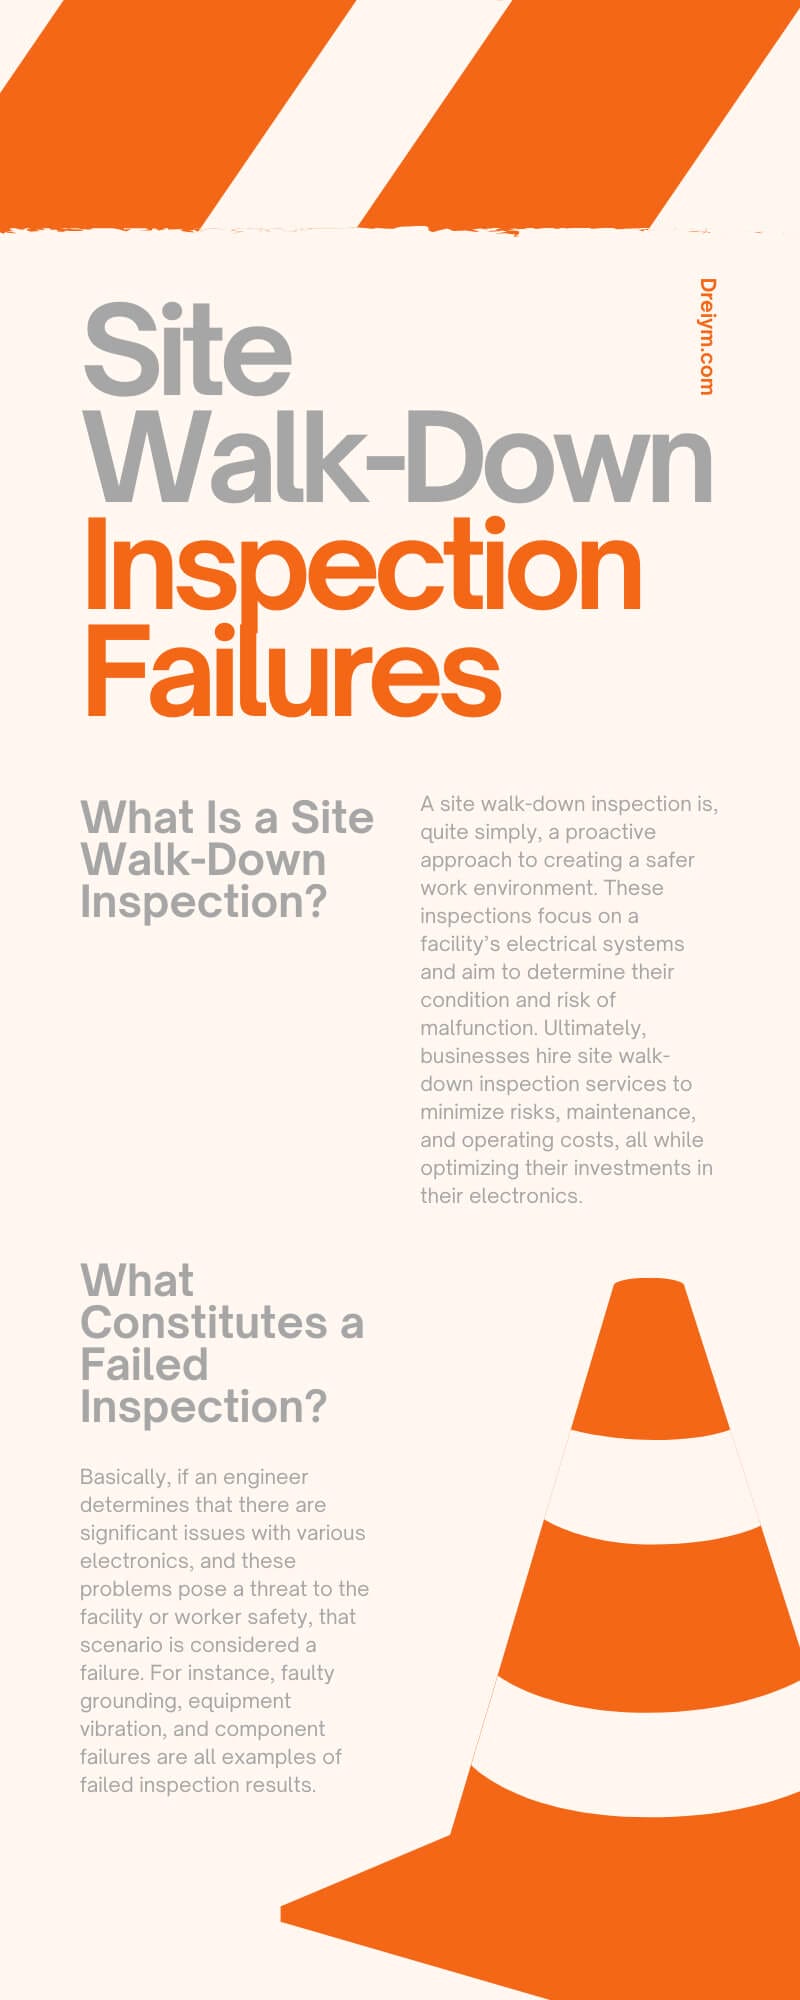 How To Respond To Site Walk-Down Inspection Failures